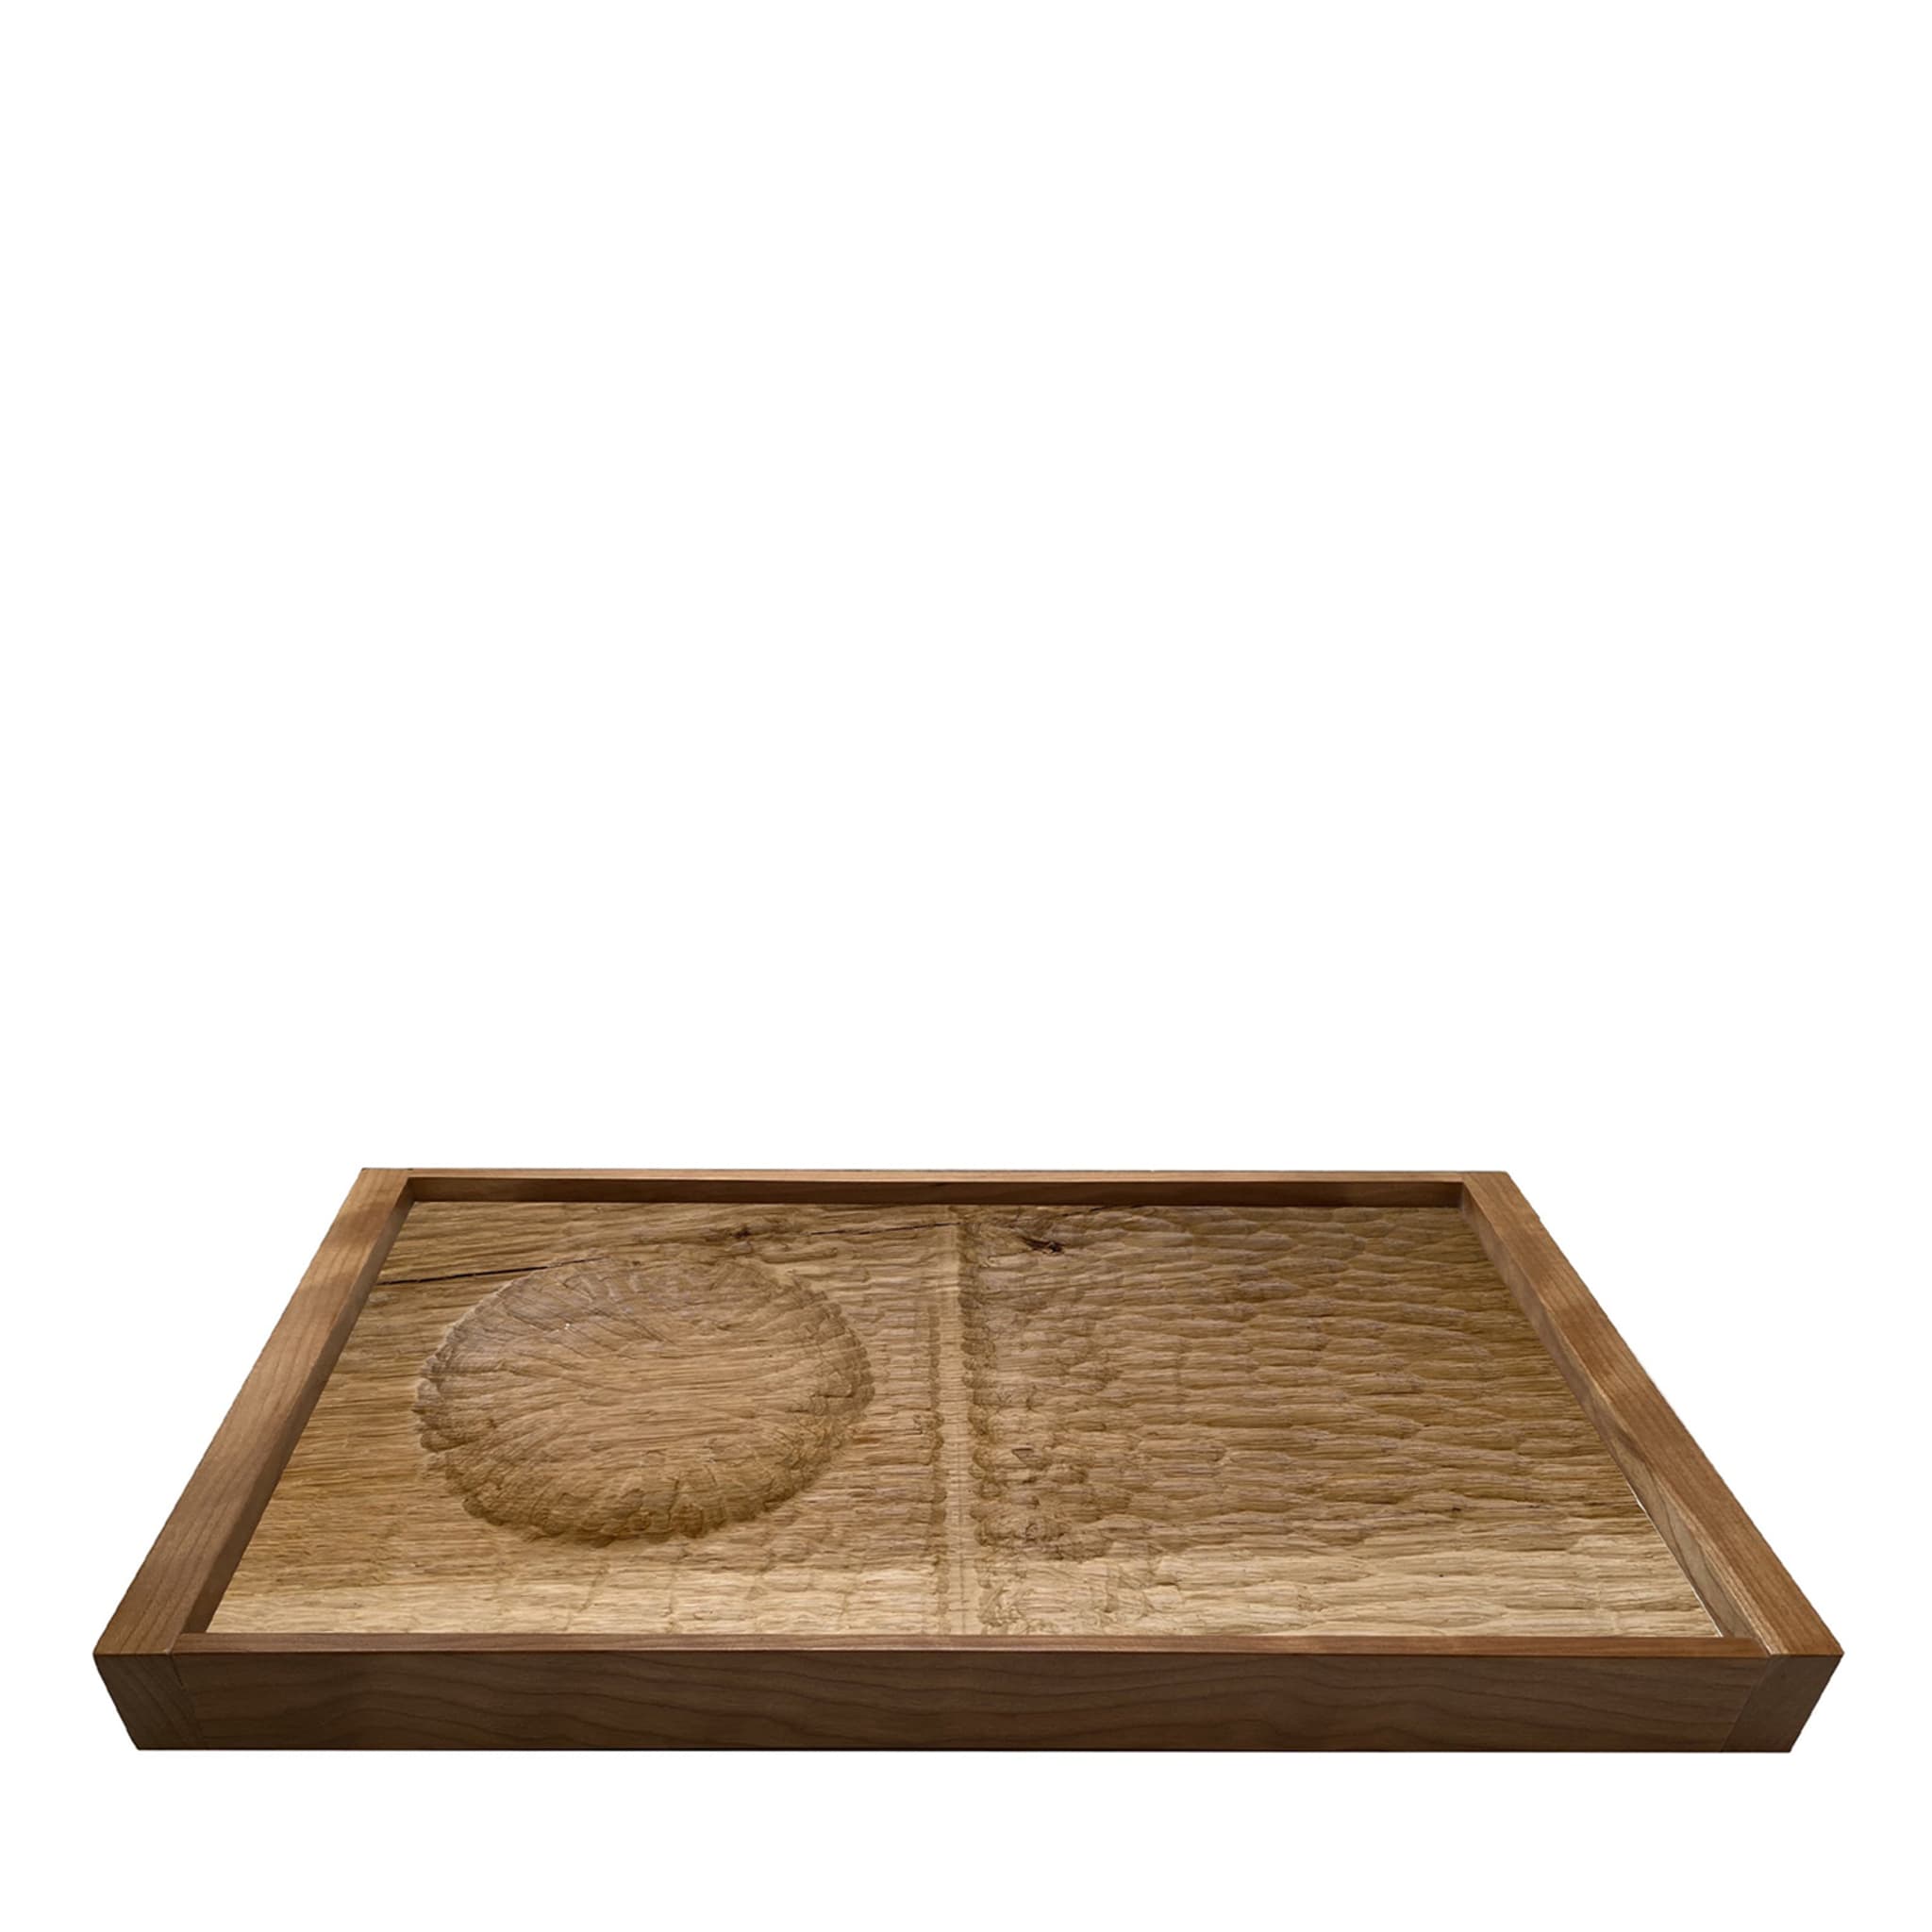 The Landscapes of Tuscany Infinito Tray by Meccani Studio - Main view